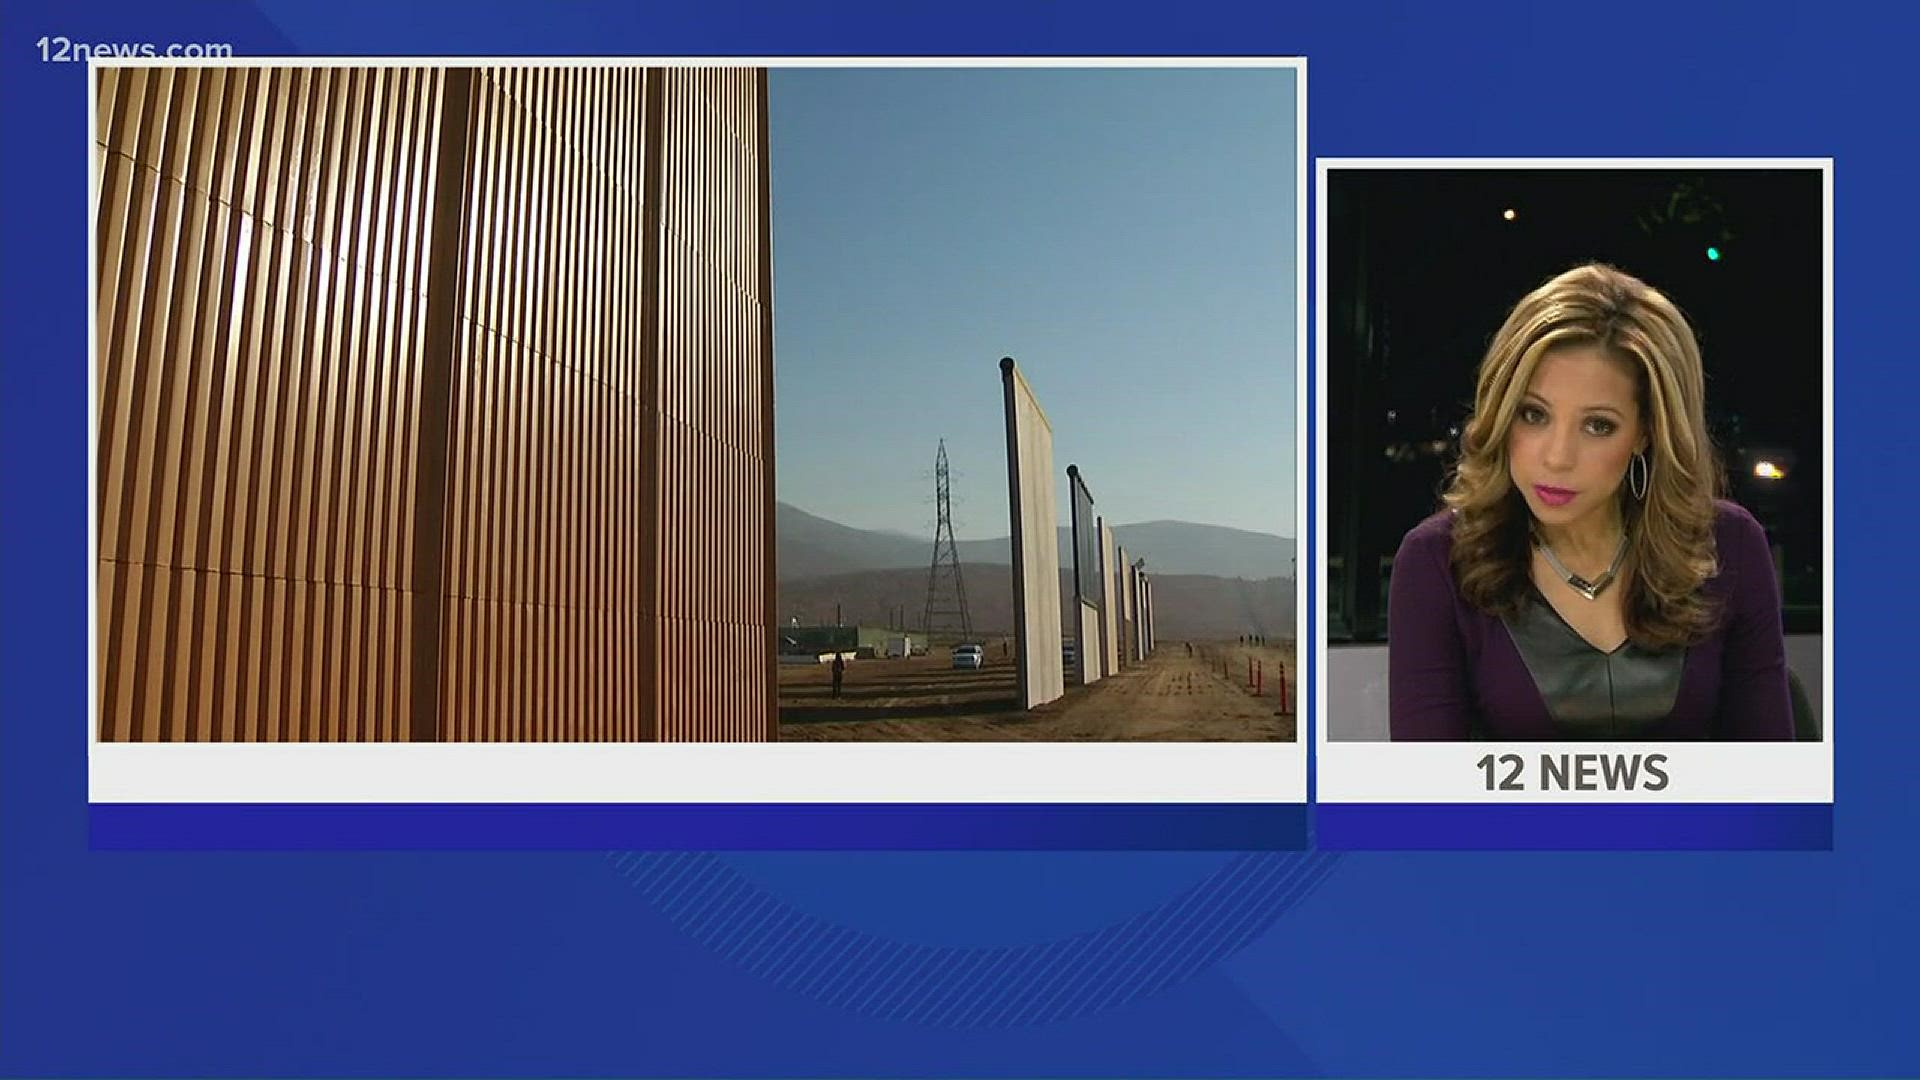 Flagstaff council members to vote on whether they will support any local businesses involved in the construction or maintenance of the border wall.